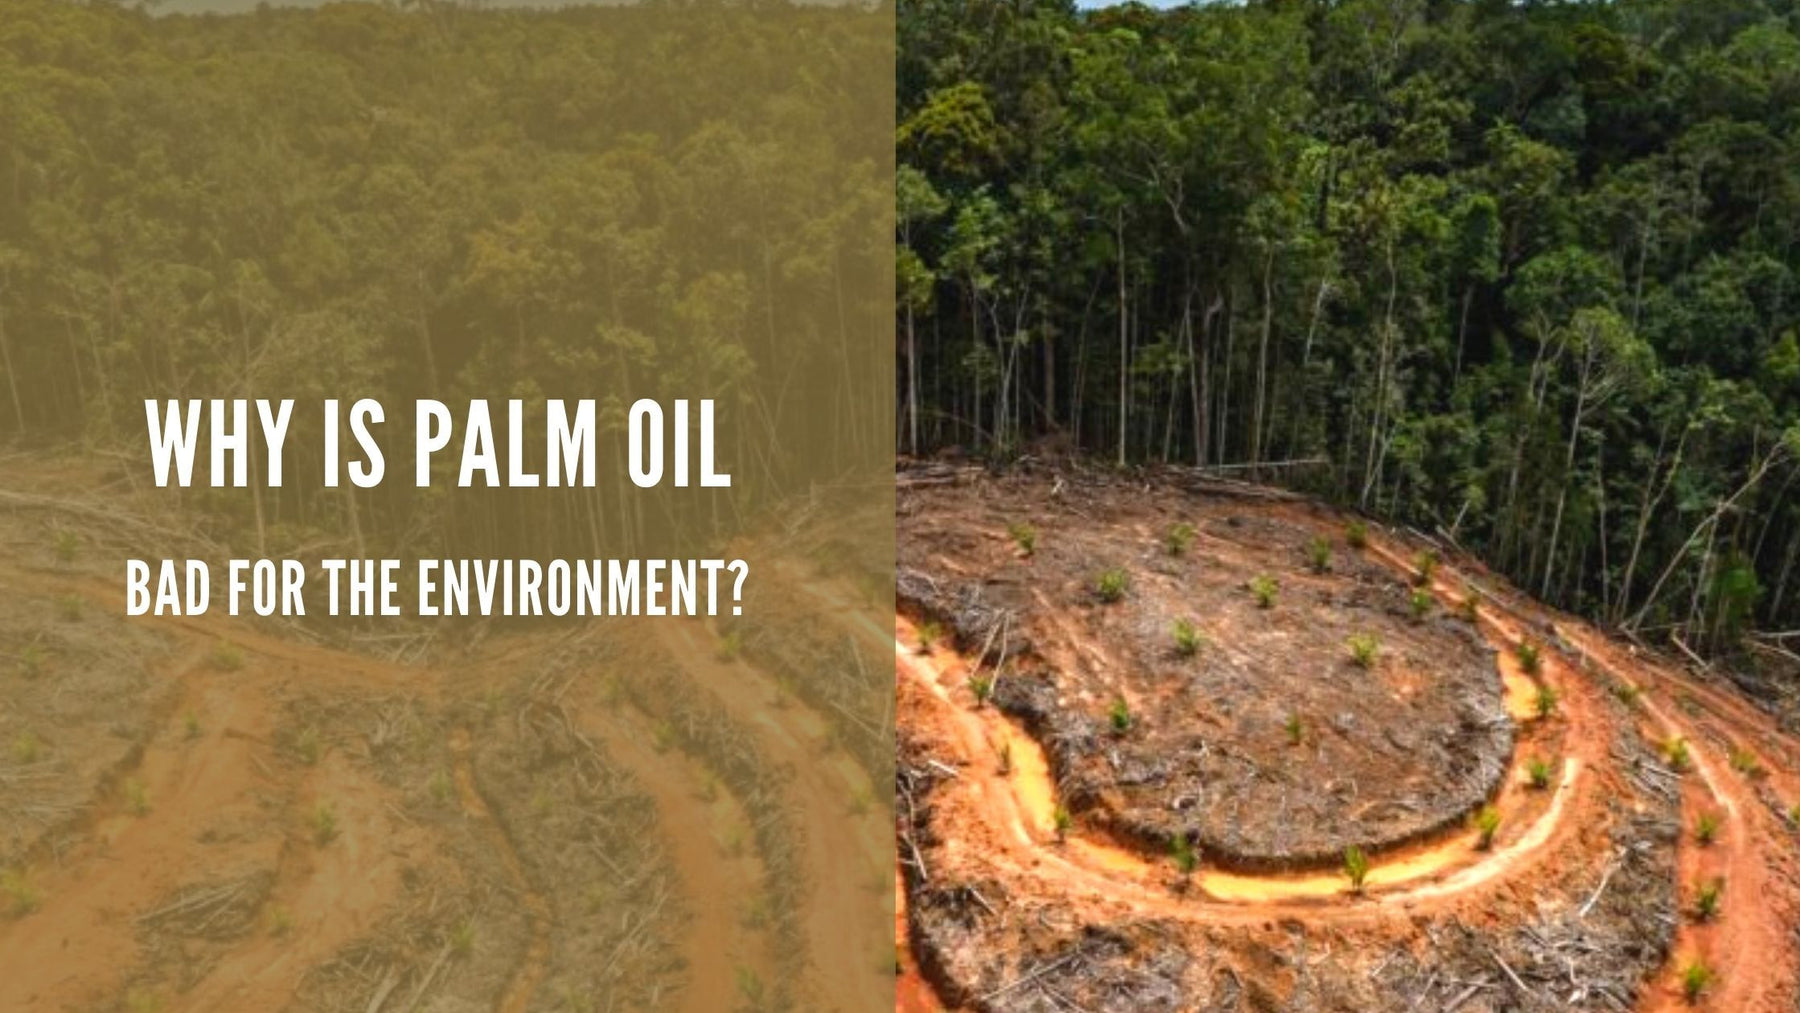 Why Is Palm Oil Bad For The Environment?